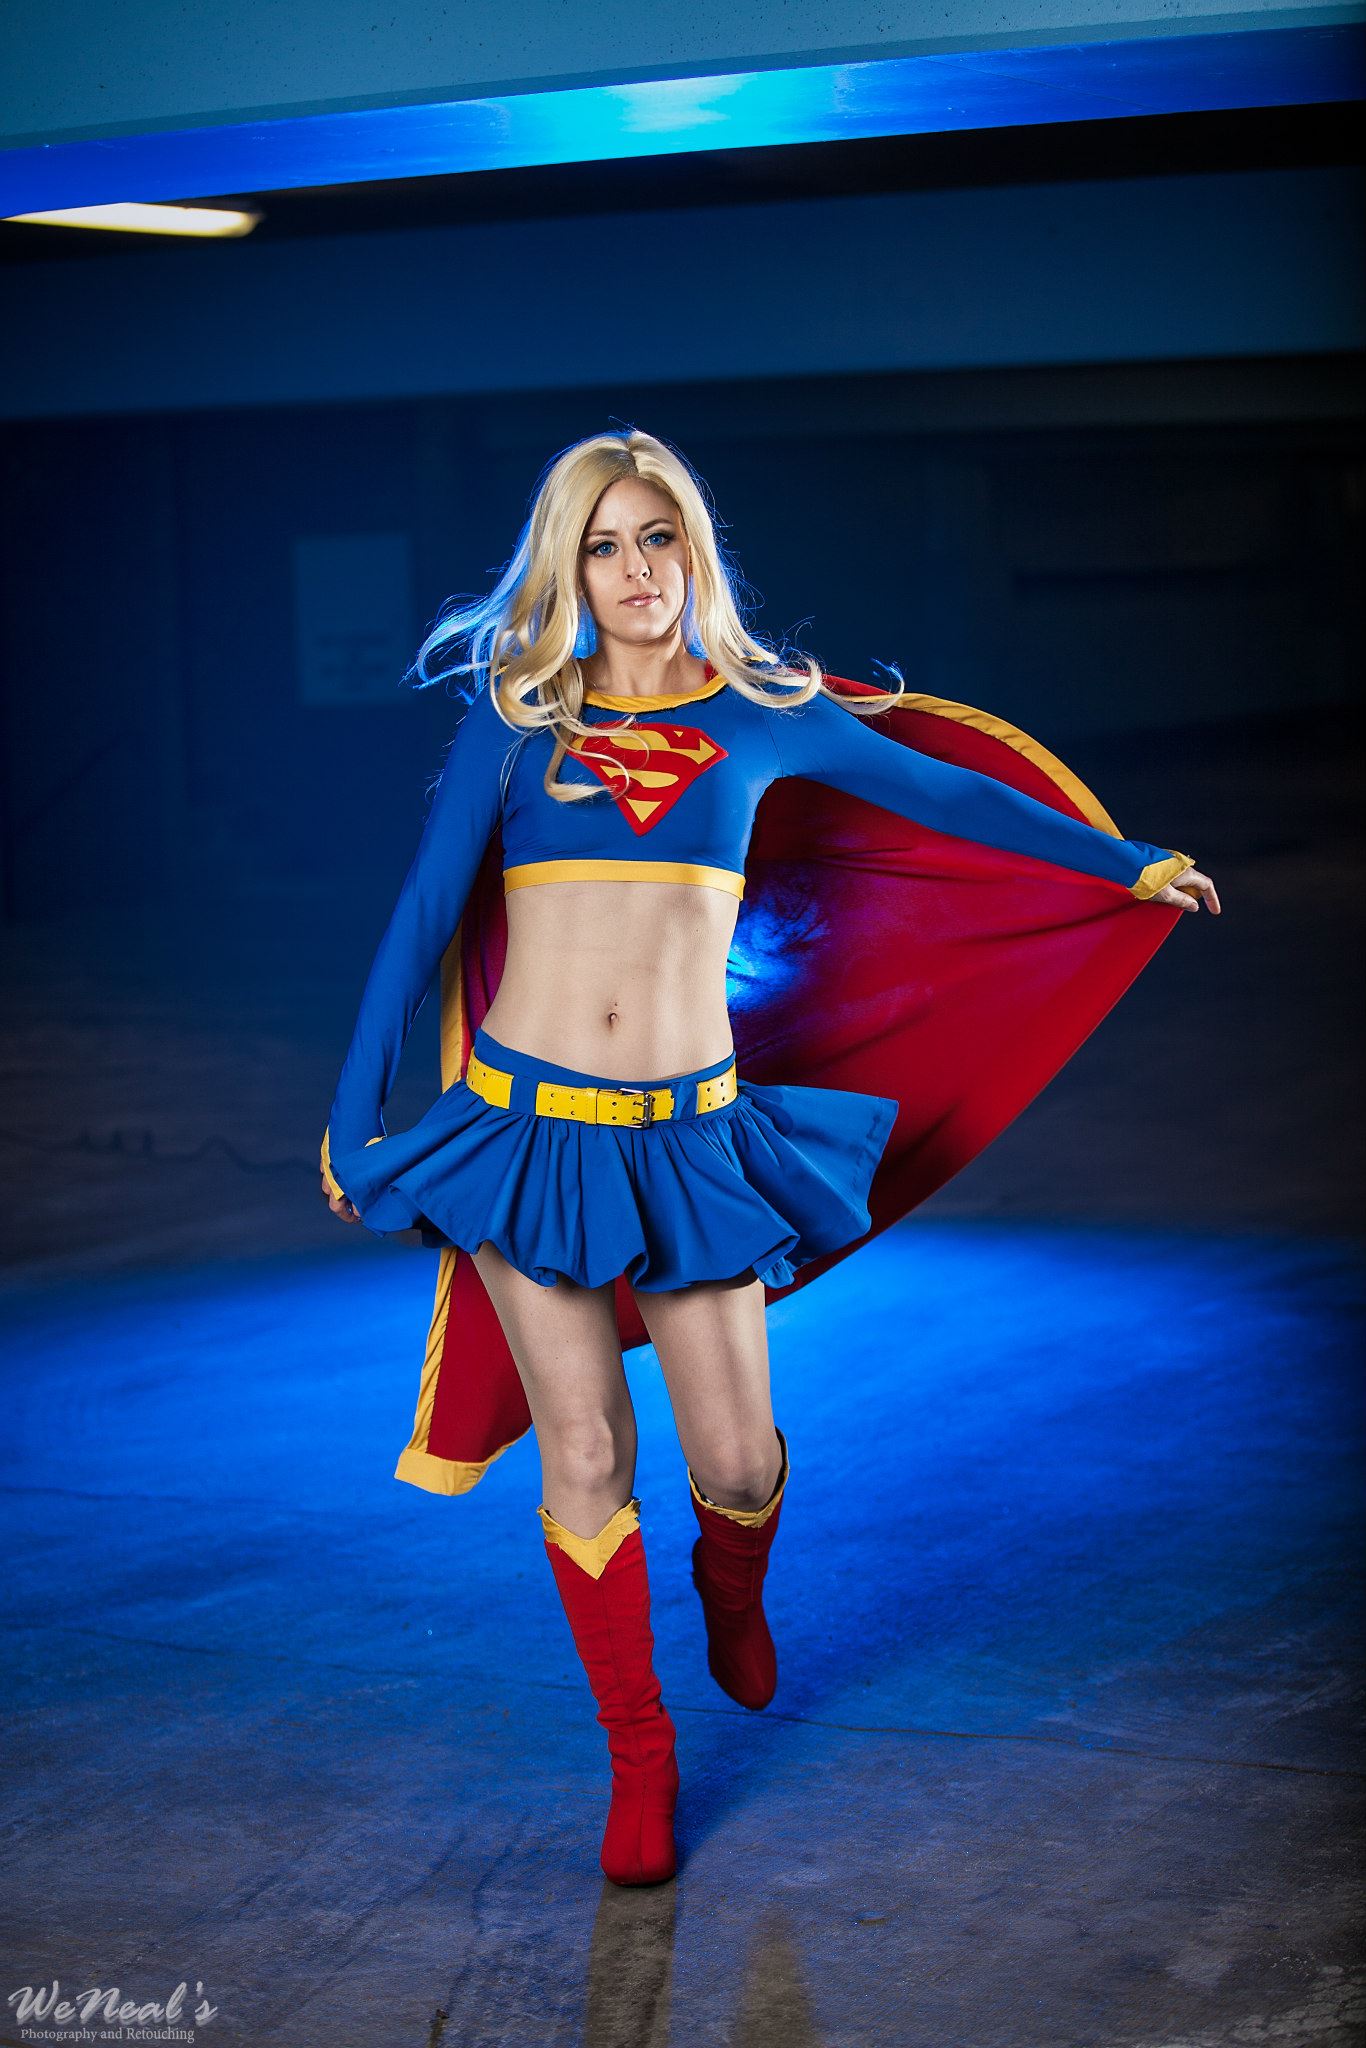 Supergirl skirt history: How the superhero's outfit has changed.